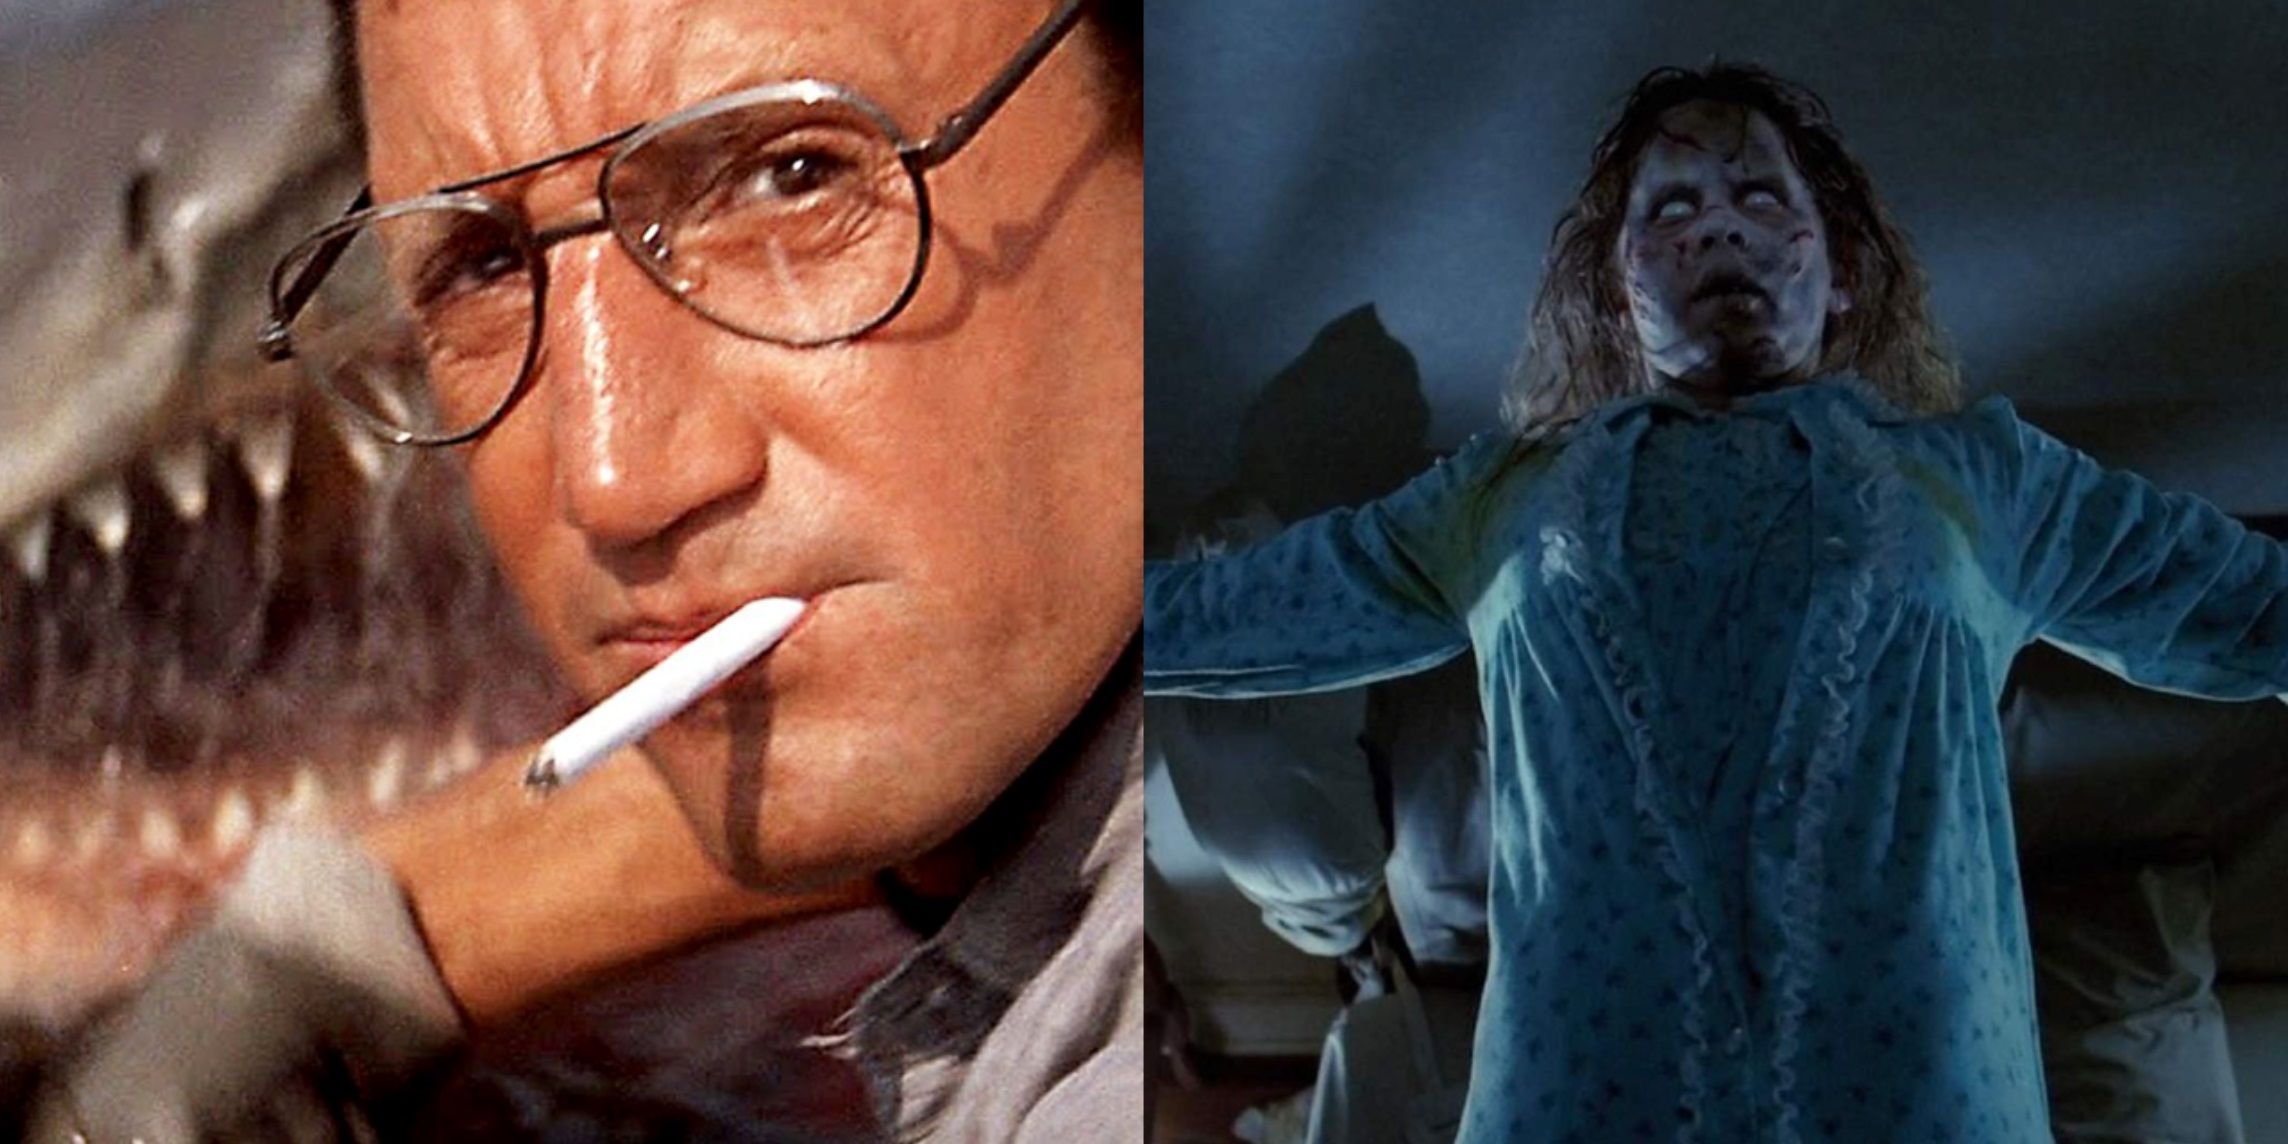 Split image of Chief Brody in Jaws and Regan in The Exorcist